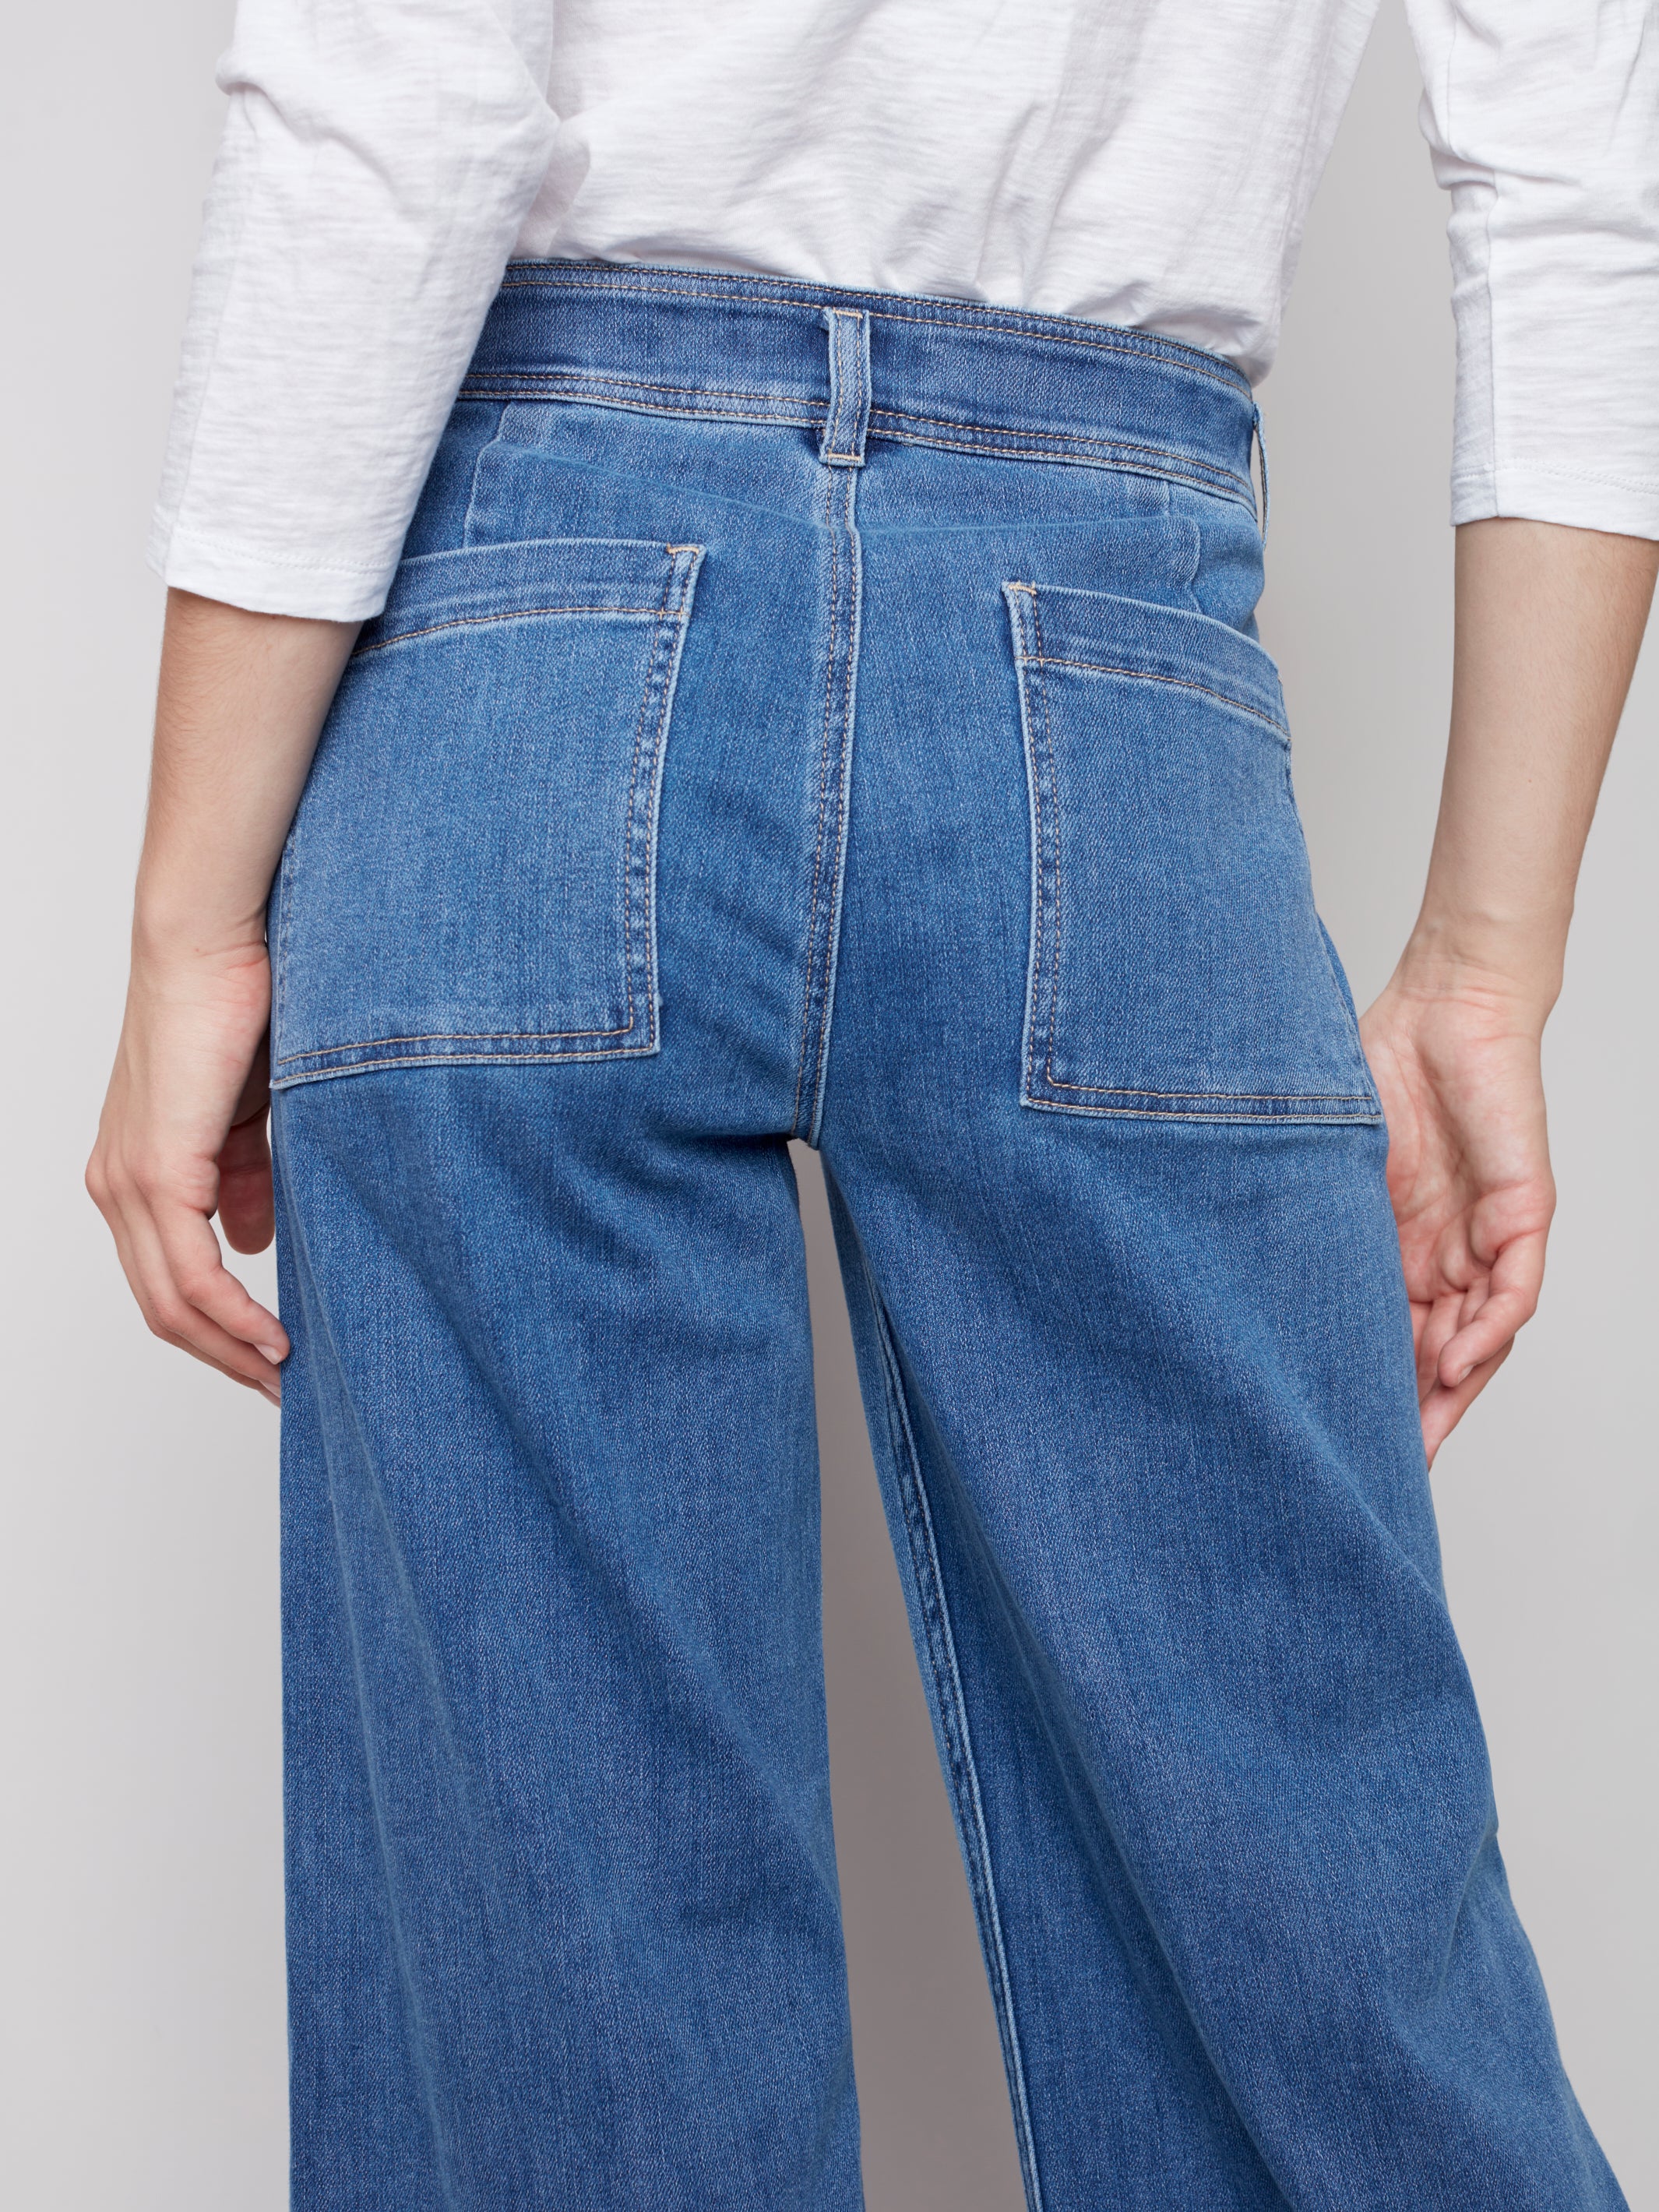 Wide Leg Jeans with Raw Edge Hem by Charlie B